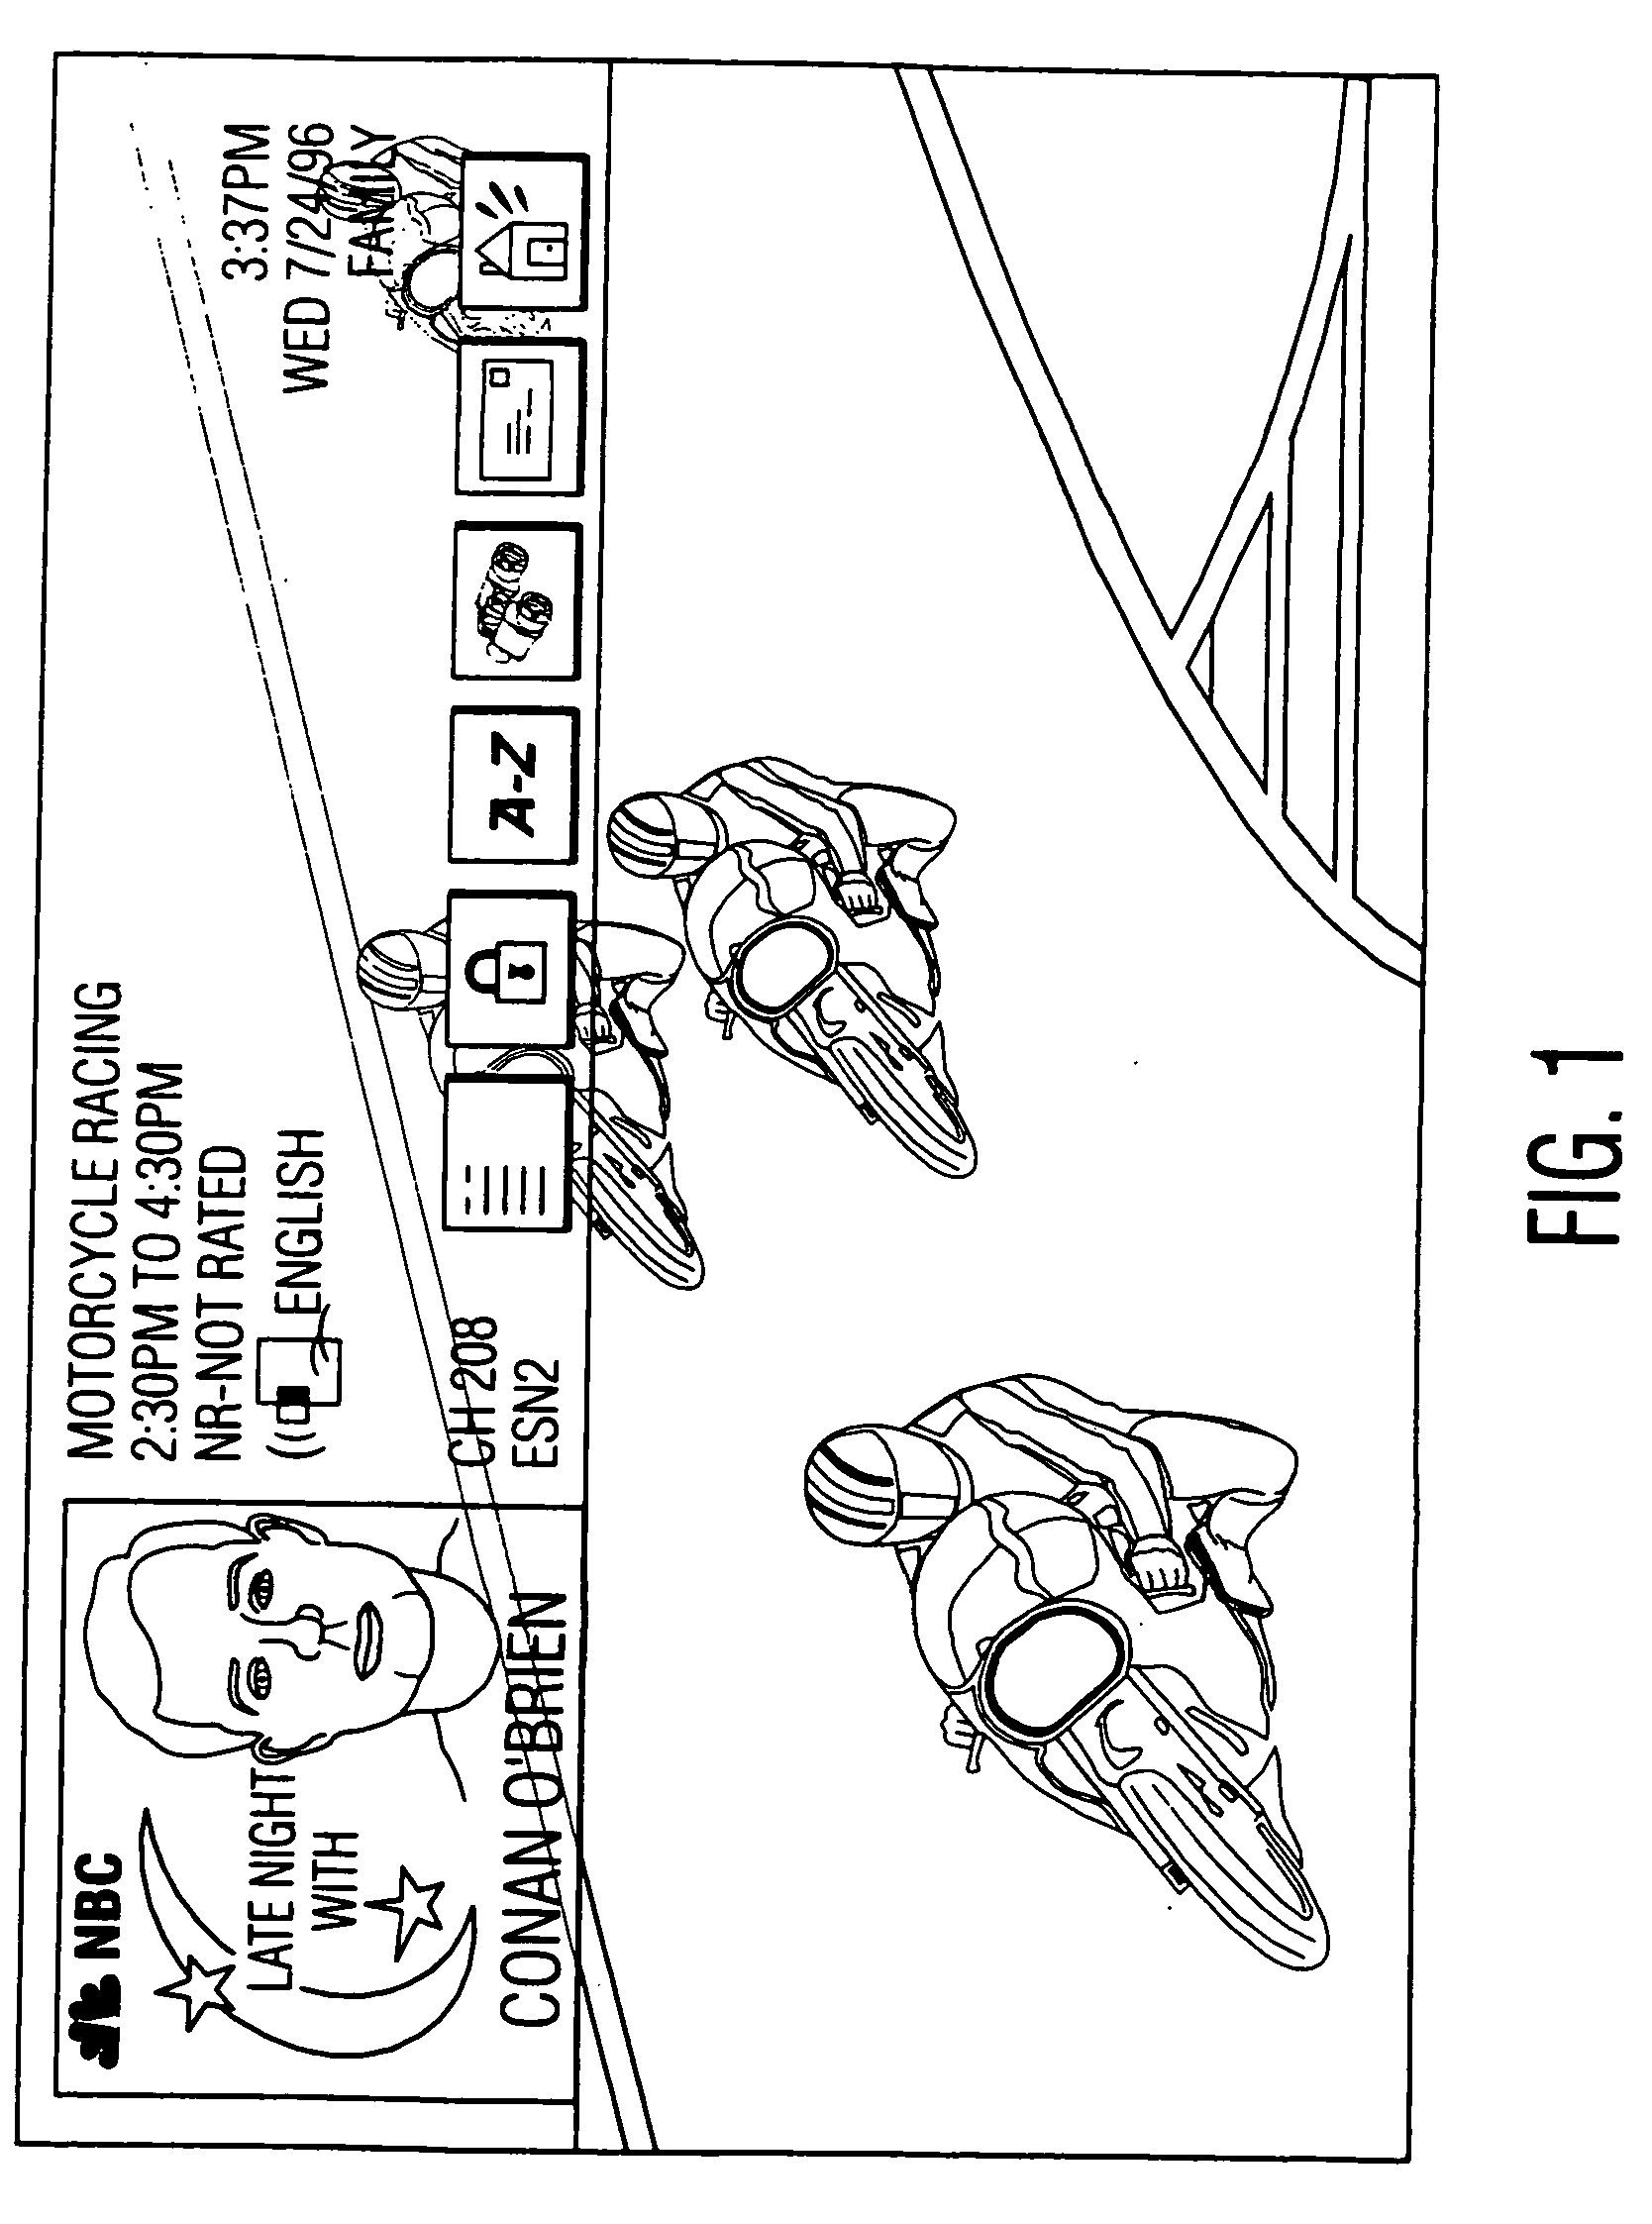 Advertisement presentation and tracking in a television apparatus